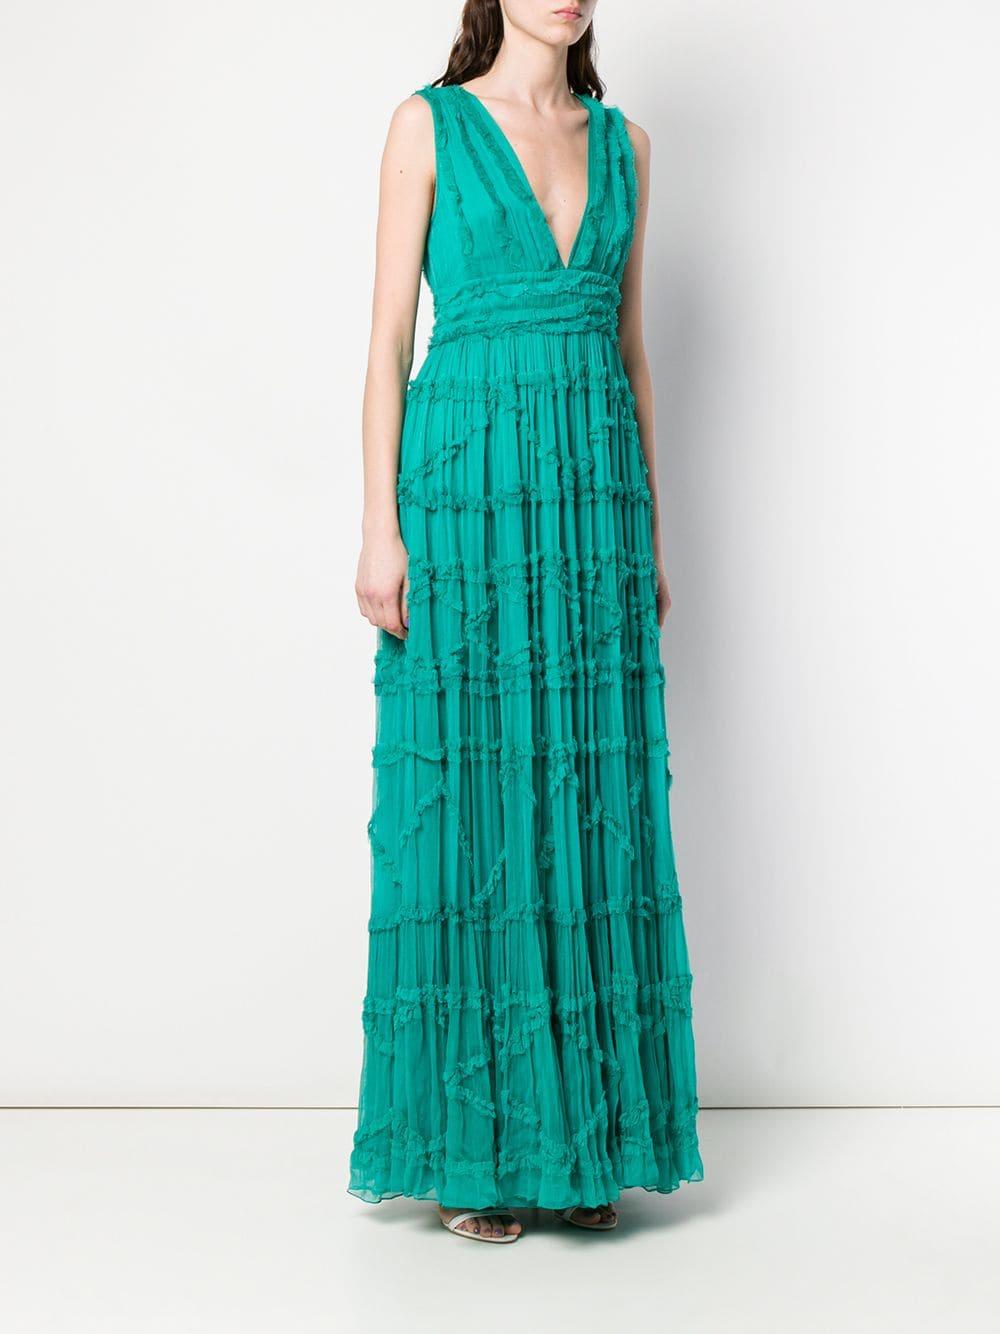 Just Cavalli Synthetic Long Crepon Gown in Green - Lyst